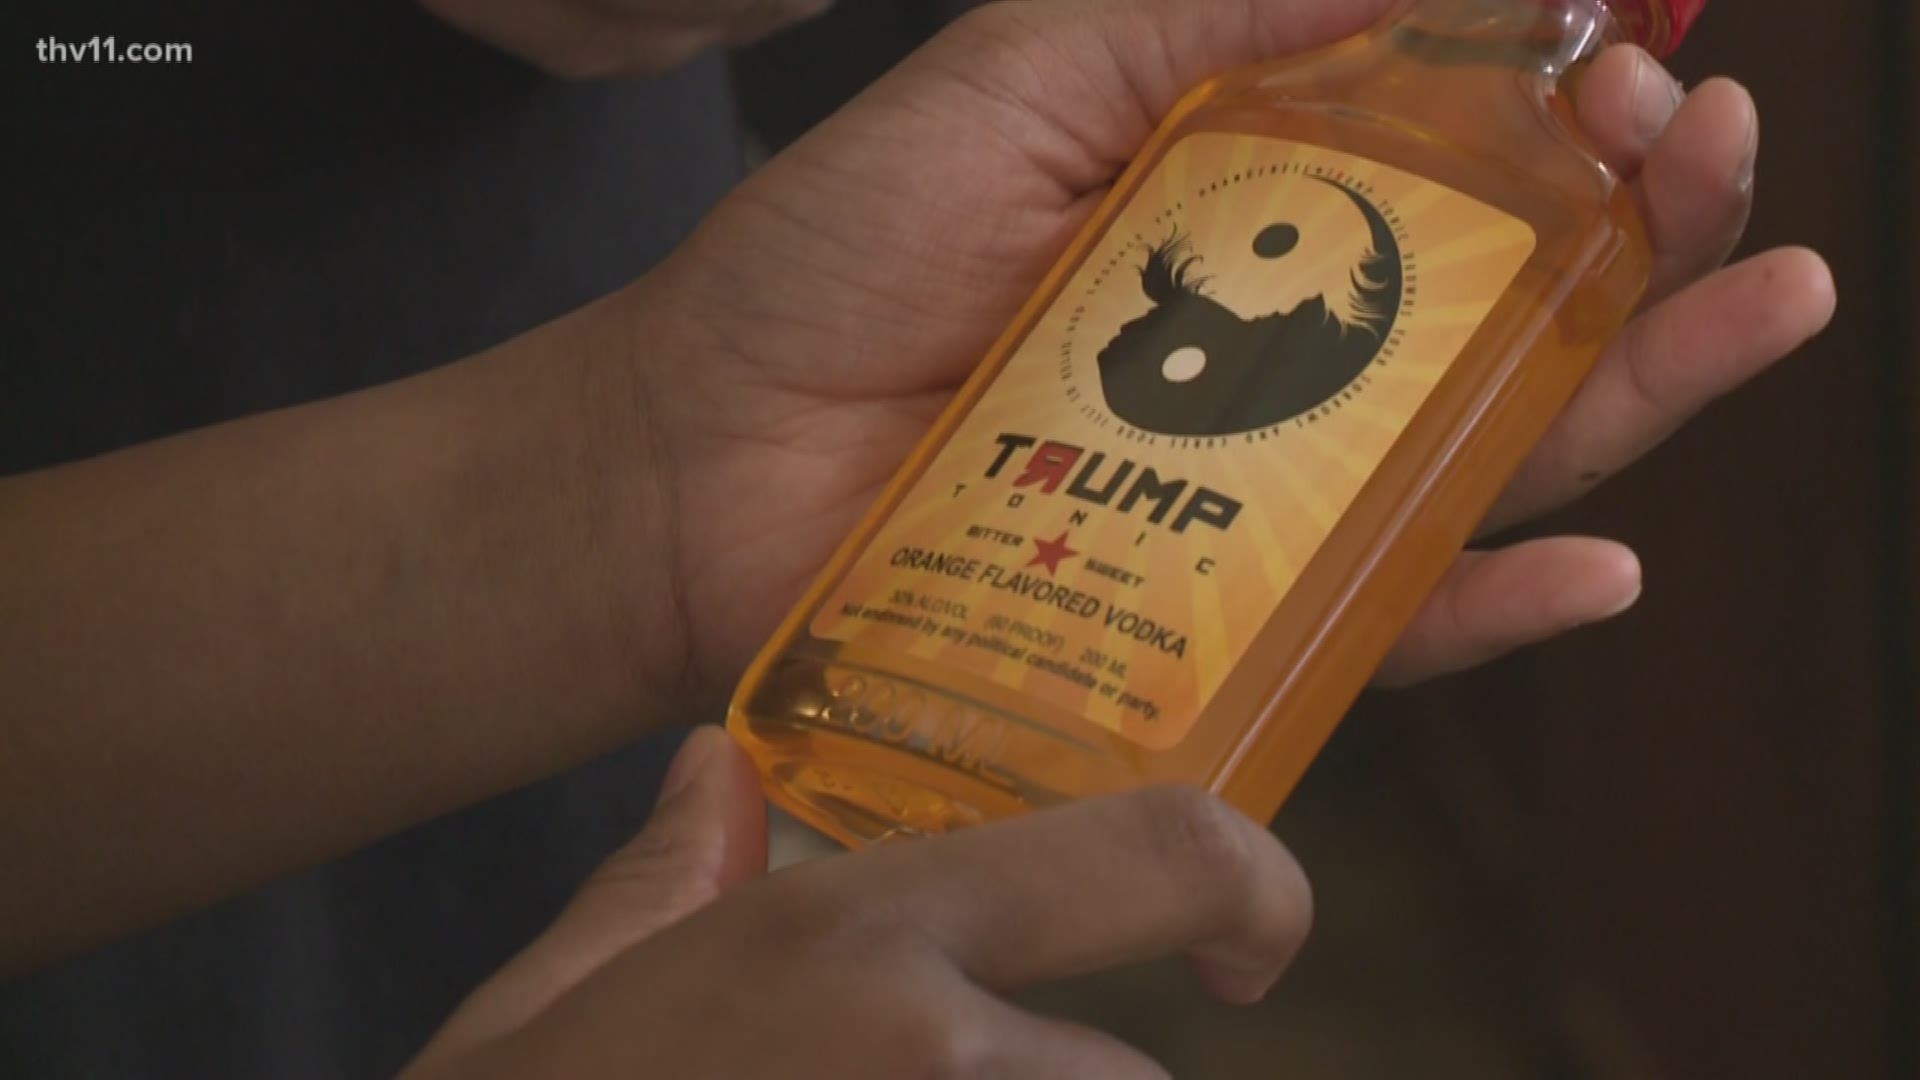 An Arkansas distillery is taking advantage of the political climate.